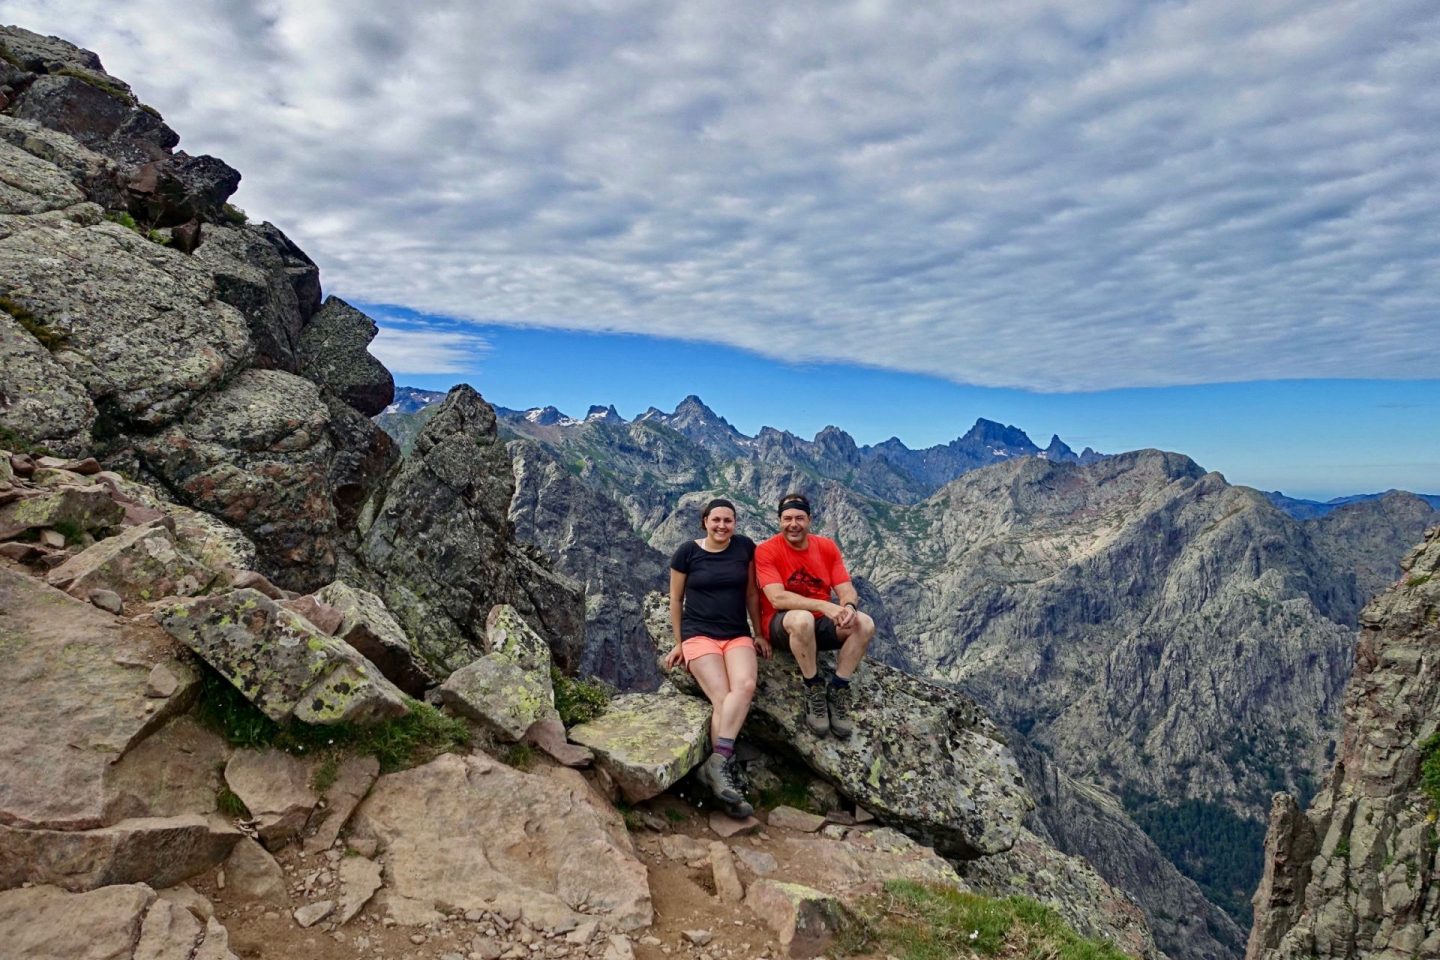 Nell and her dad sat on a rock with stunning mountain views behind them, demonstrating what to expect on the GR20